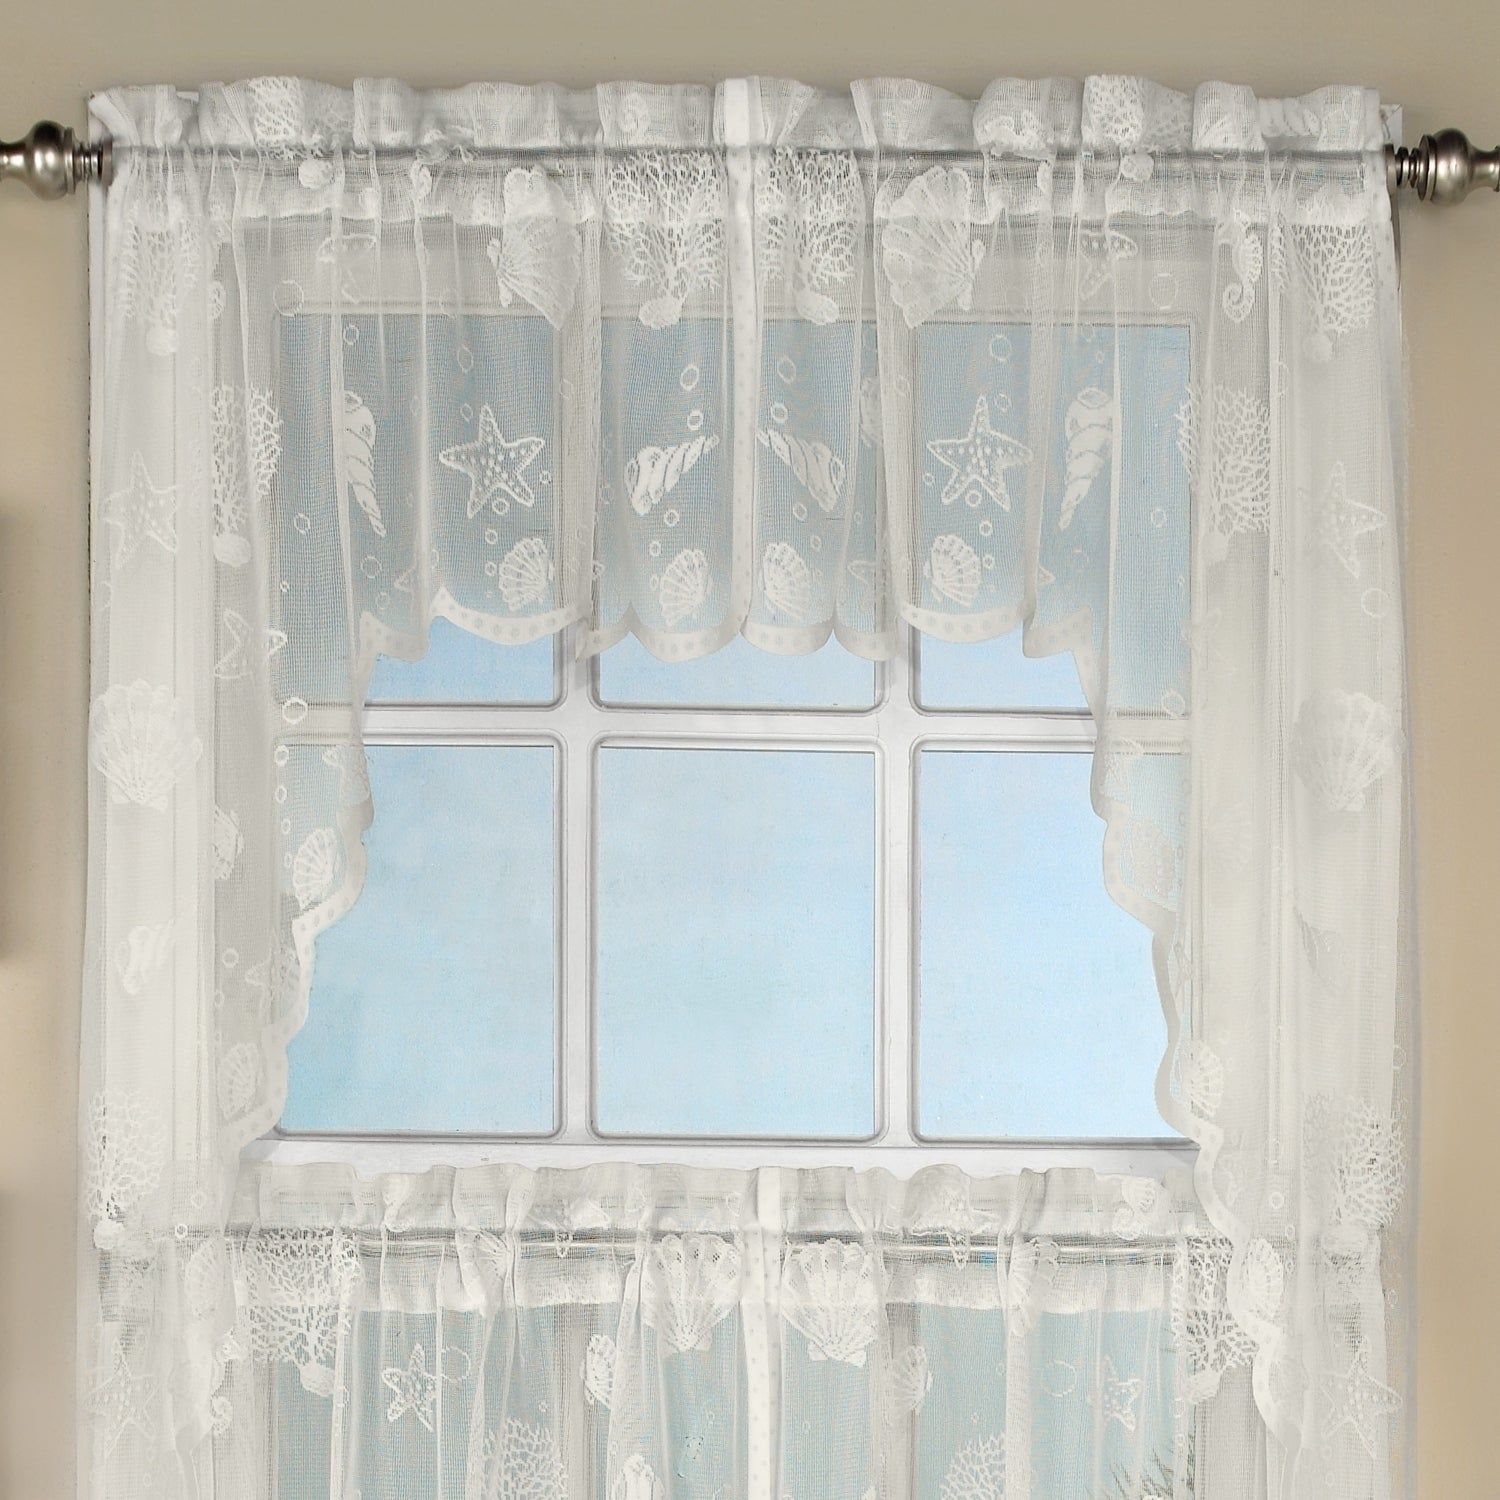 Marine Life Motif Knitted Lace Window Curtain Pieces Throughout White Knit Lace Bird Motif Window Curtain Tiers (View 6 of 20)